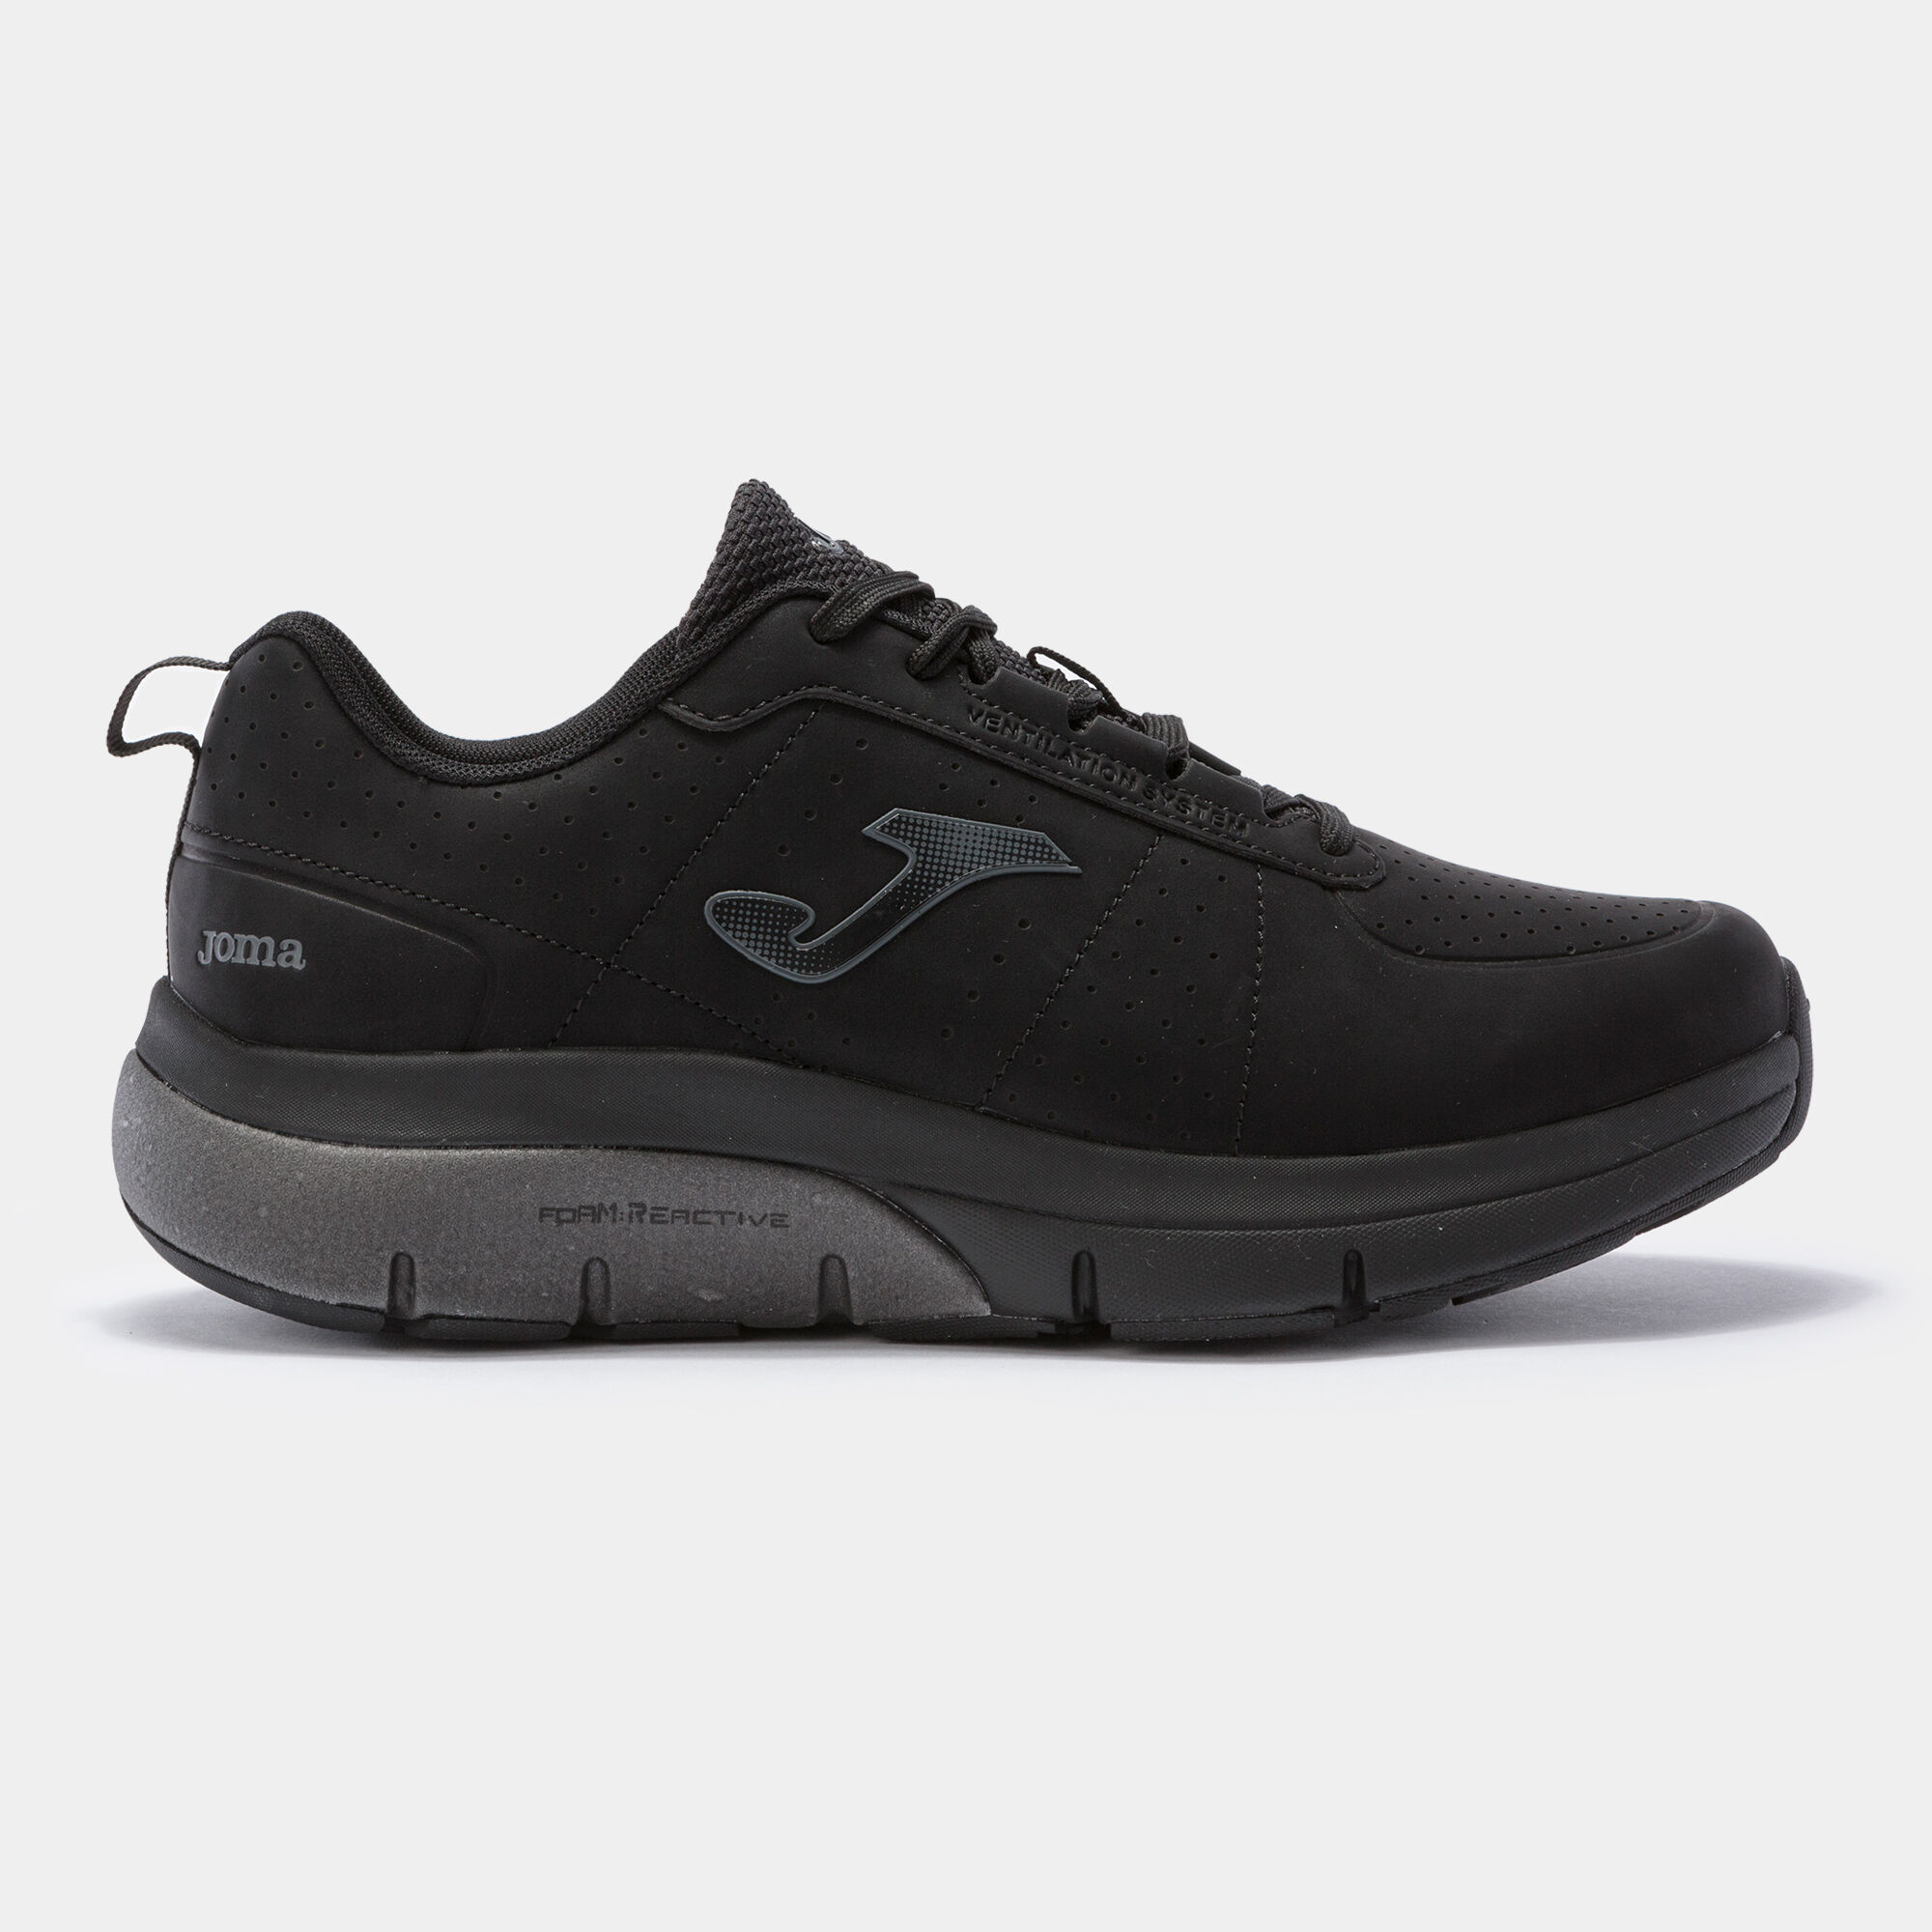 CHAUSSURES CASUAL TEMPO 21 HOMME NOIR